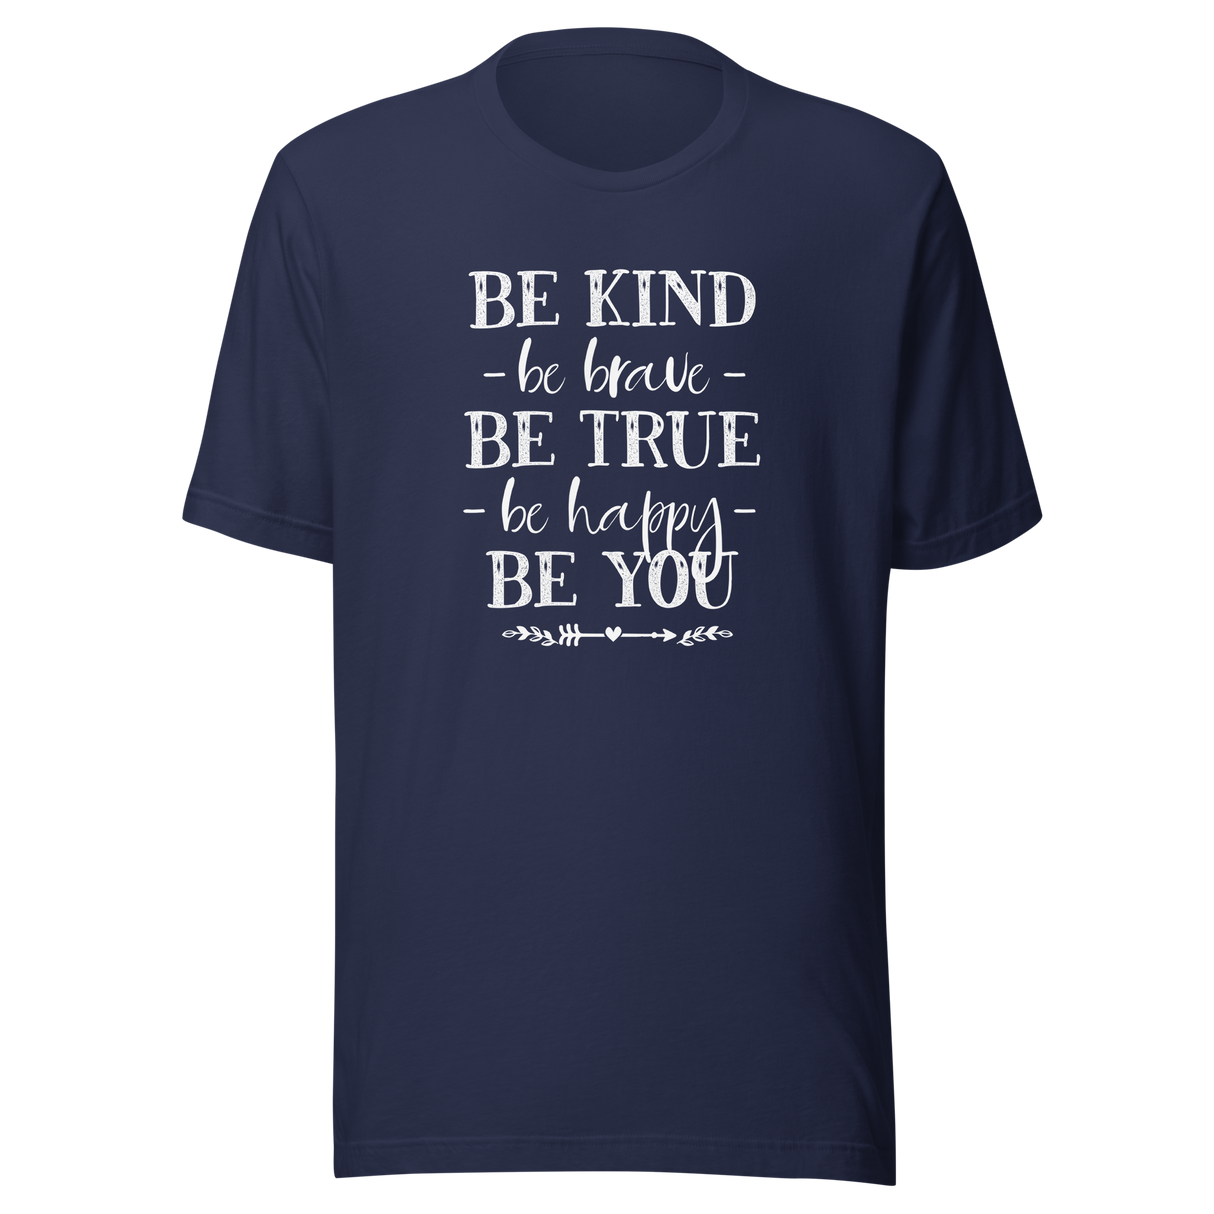 Be Kind Be Brave Be True Be Happy Be You - Life Tee - Kindness T-Shirt - Bravery Tee - Truth T-Shirt - Happiness Tee